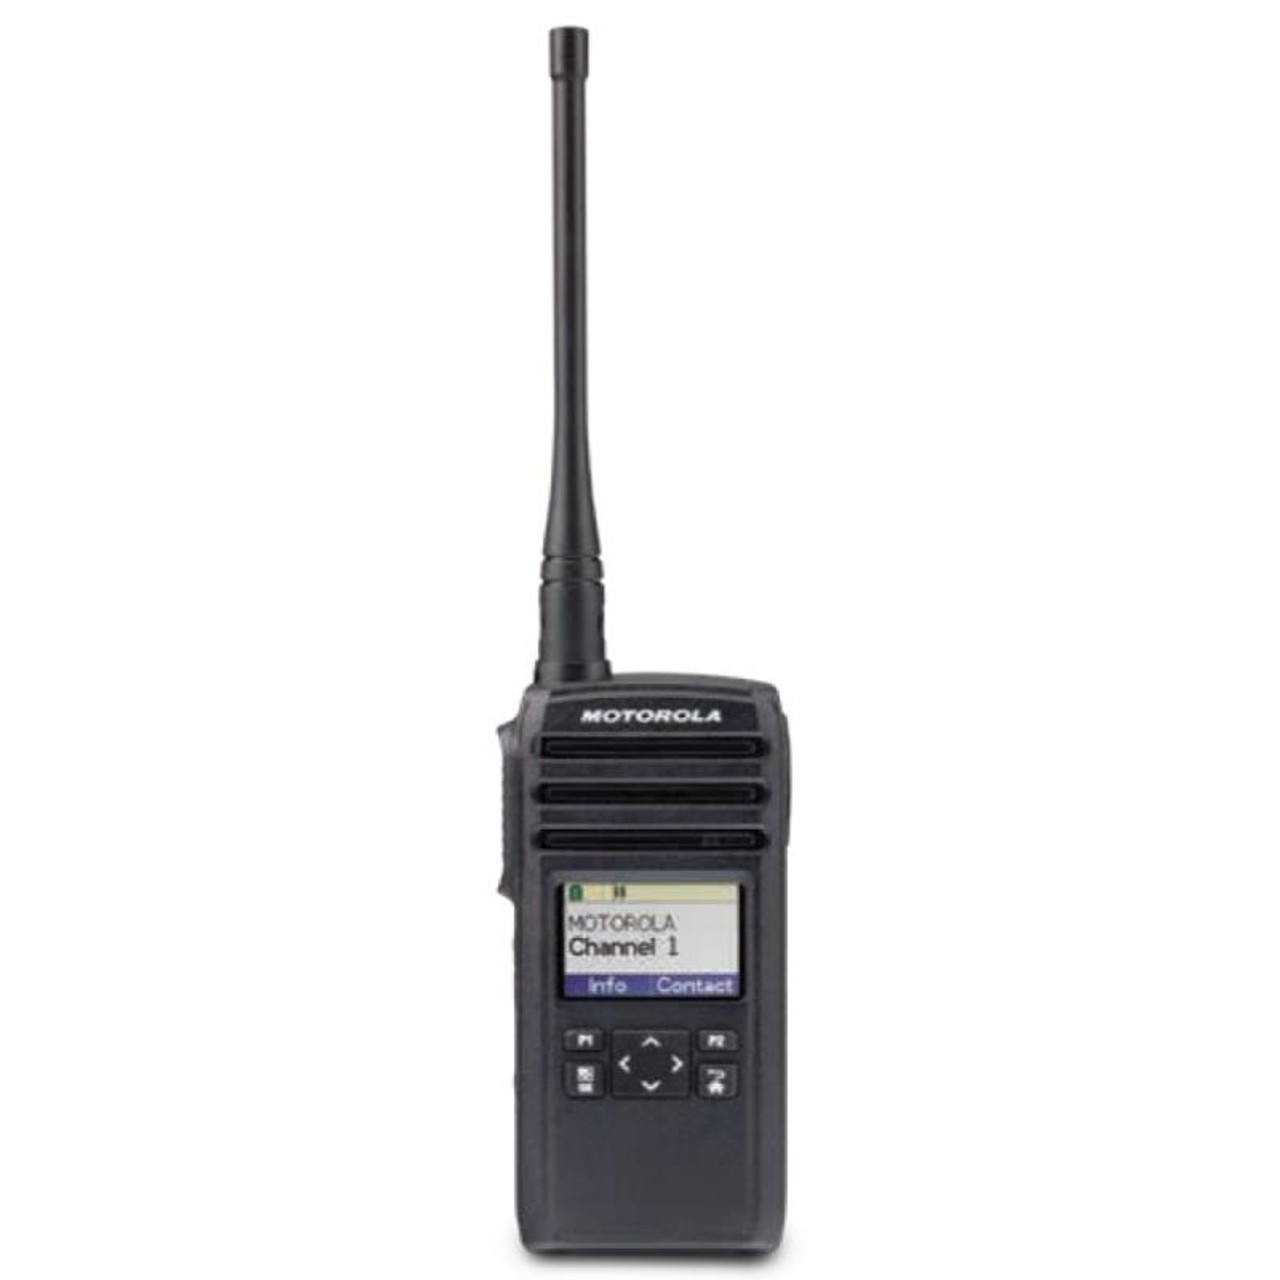 LICENSE FREE Motorola DTR600 Digital Two Way Radio for business has Vibra  Call and Texting features